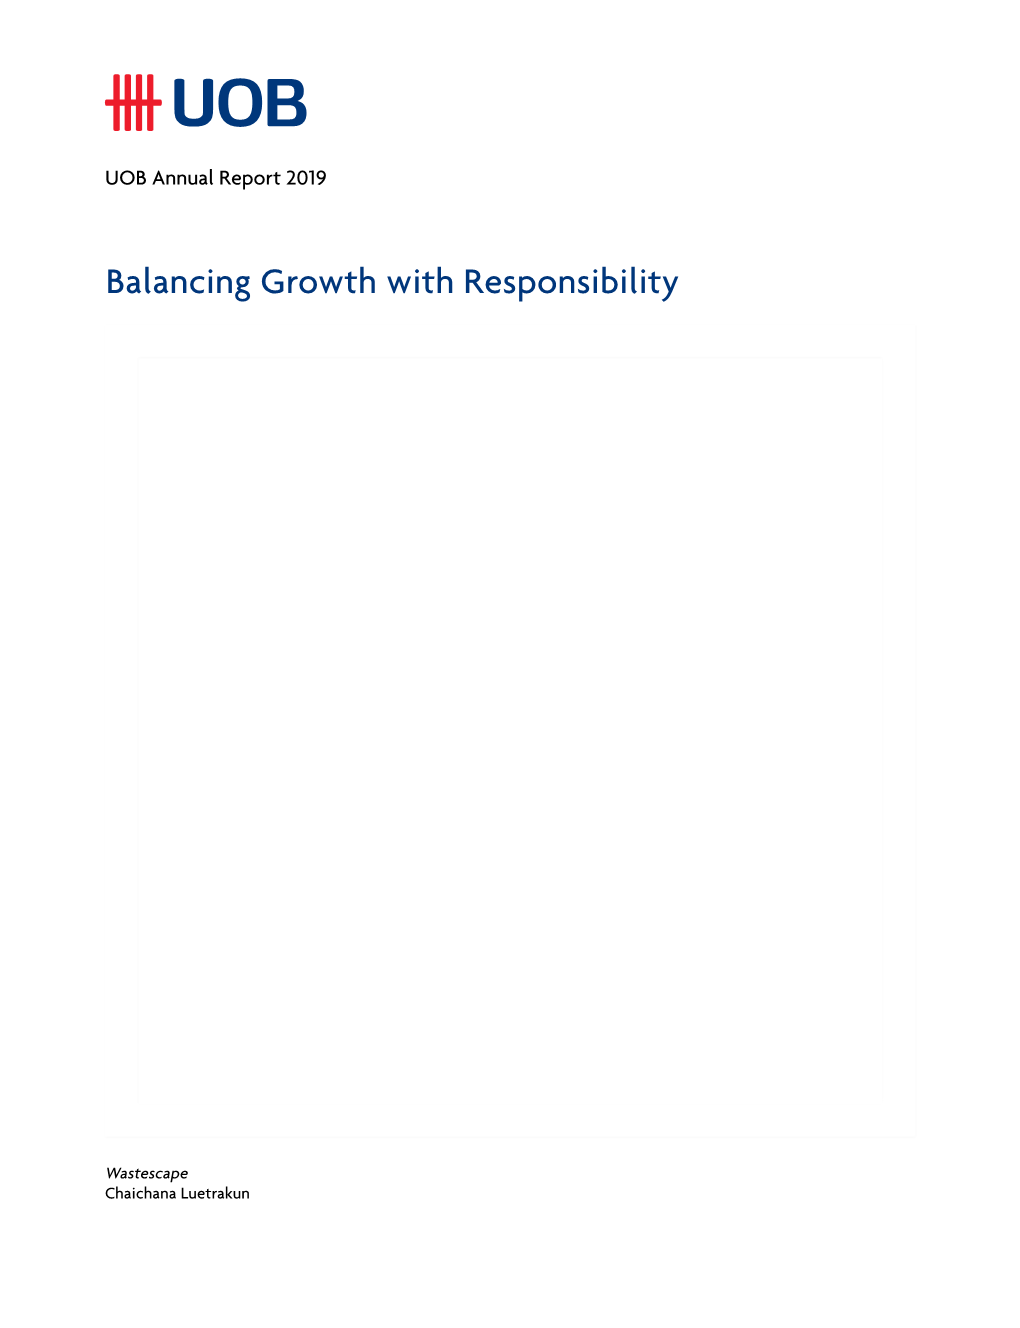 Balancing Growth with Responsibility